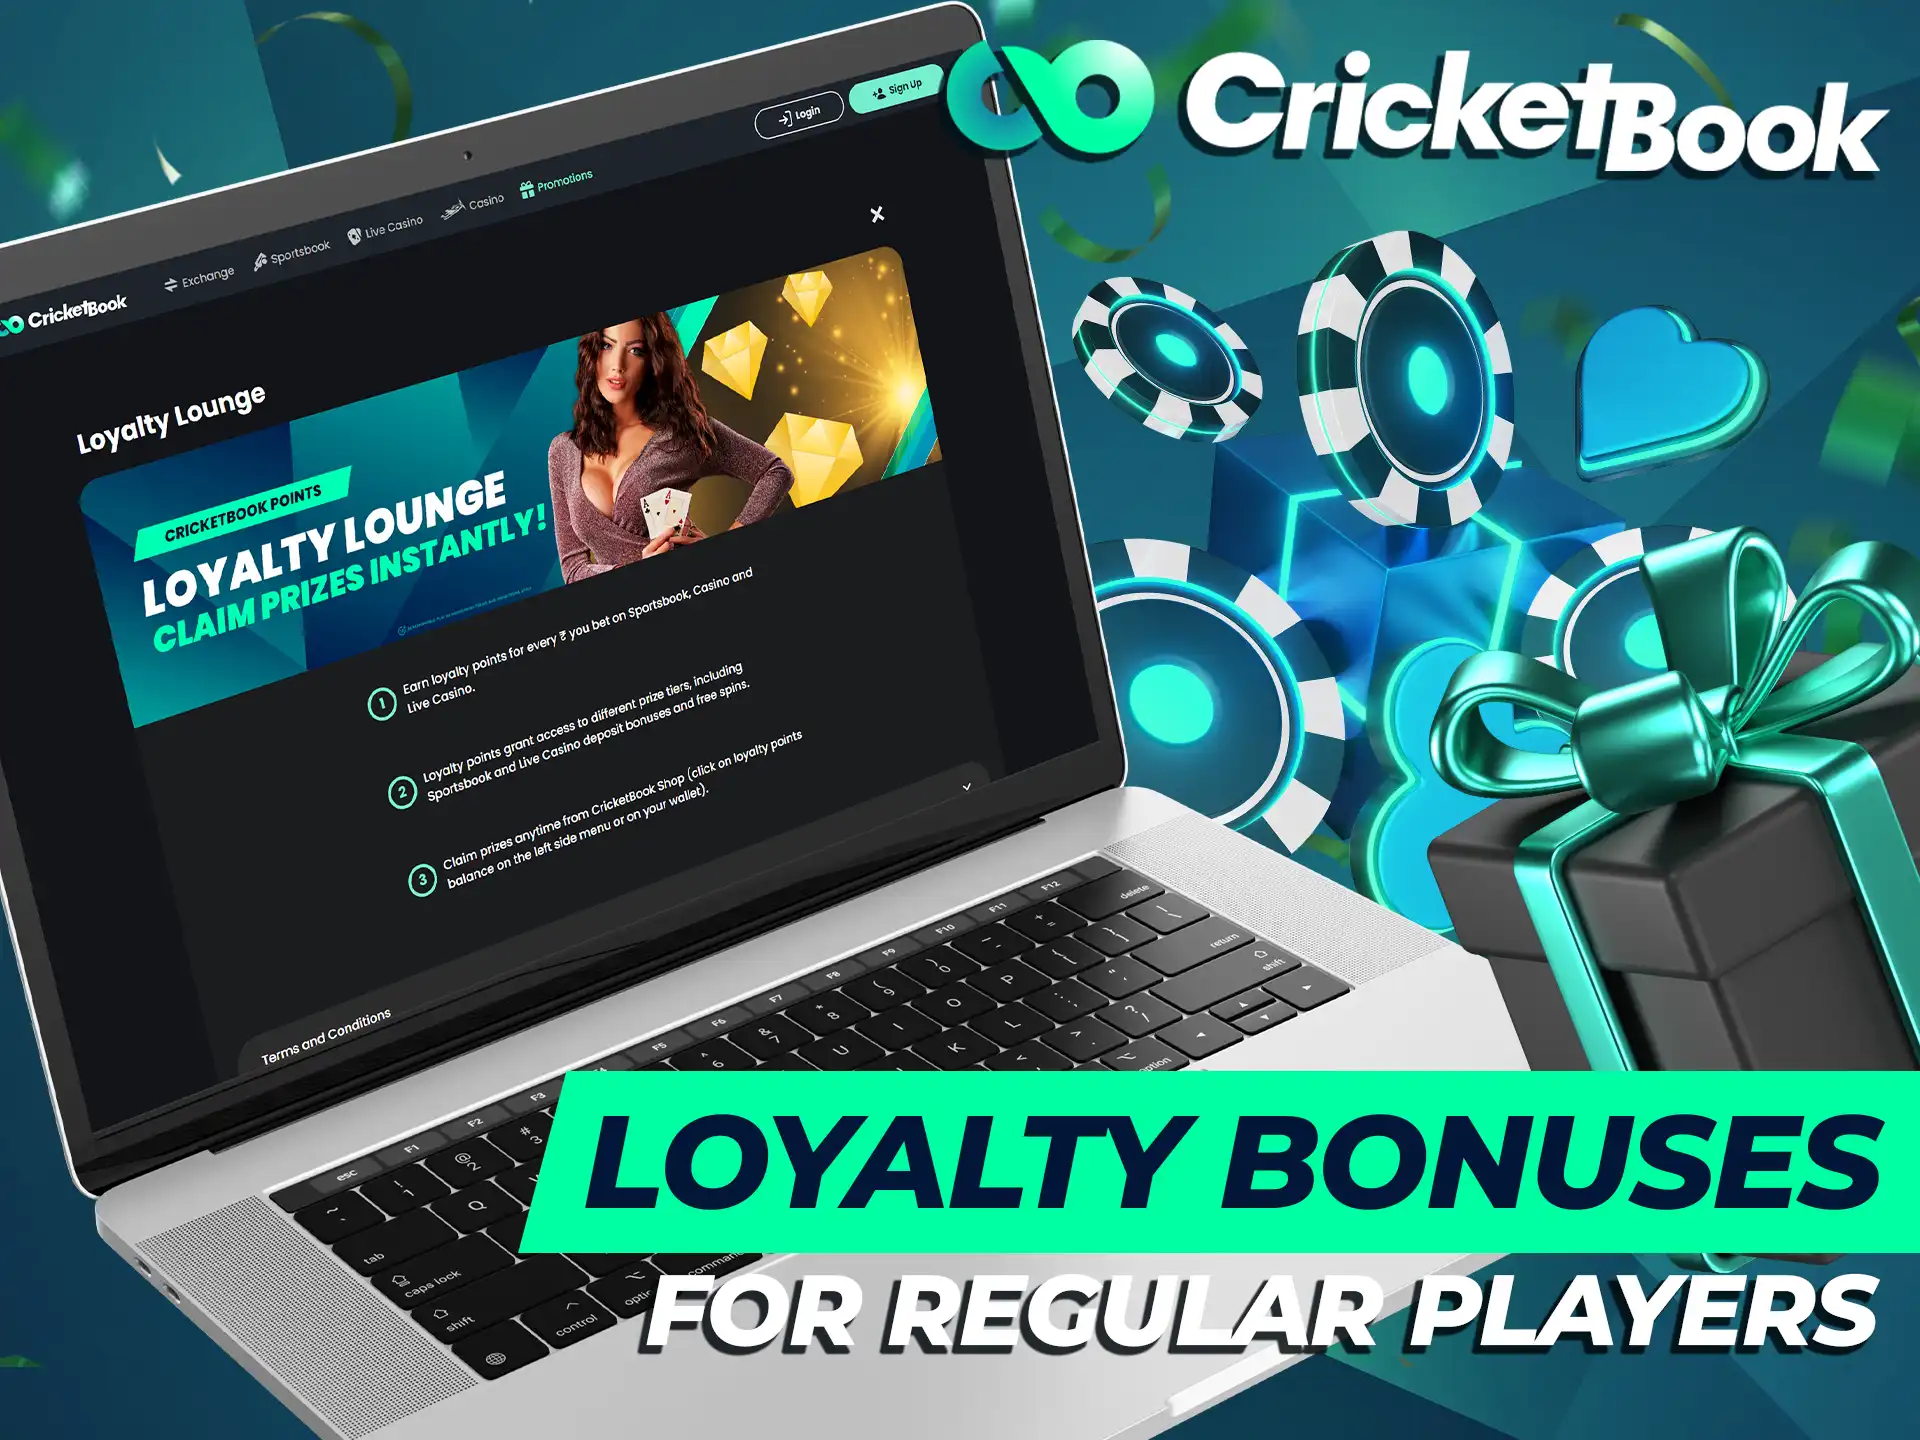 The CricketBook loyalty program opens up many additional opportunities.